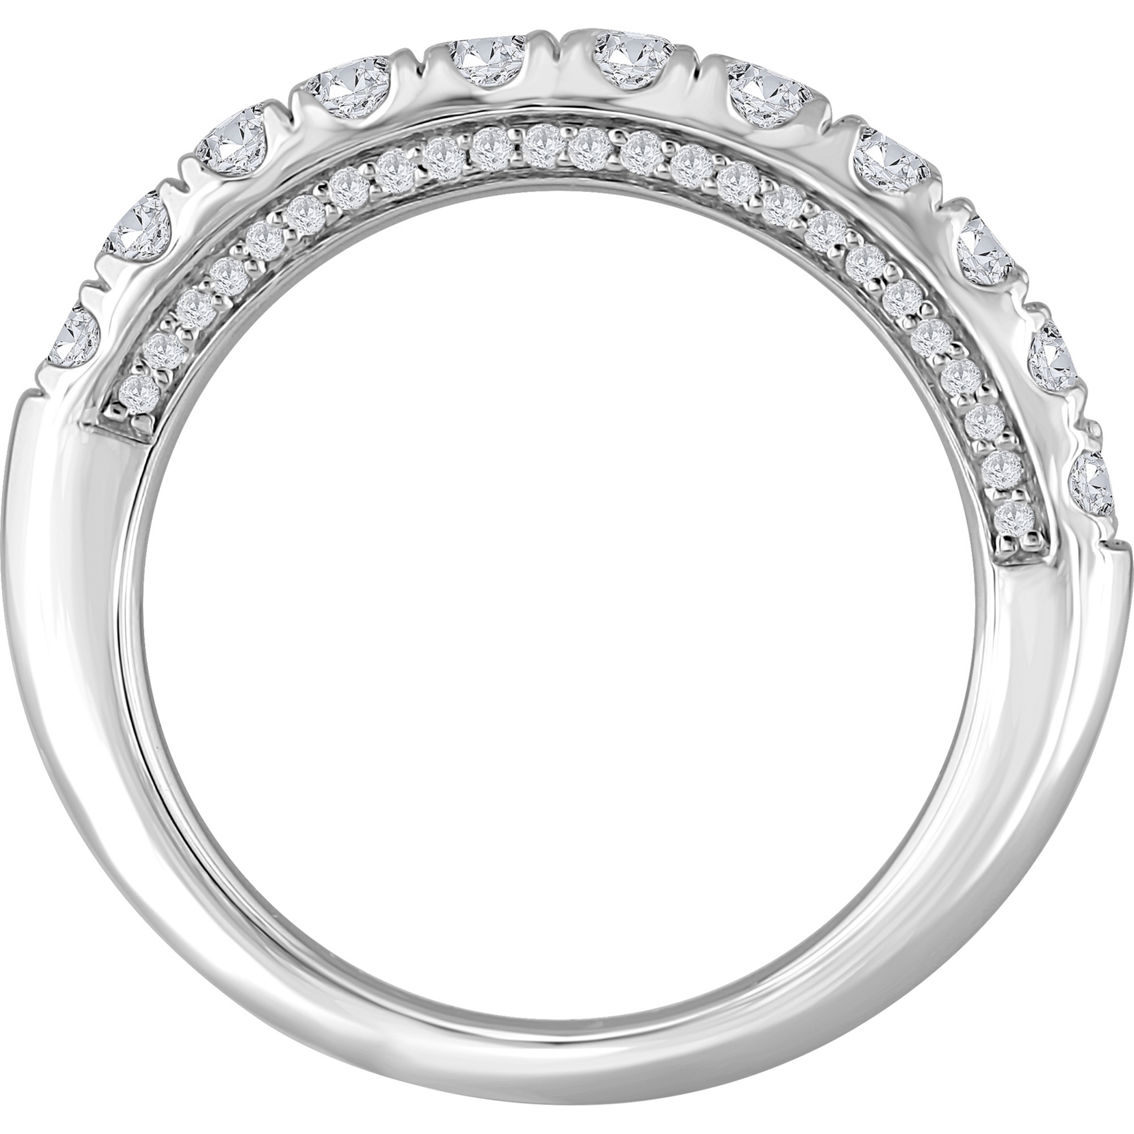 From the Heart 14K White Gold 1 CTW Lab Grown Diamond Anniversary Ring - Image 2 of 2